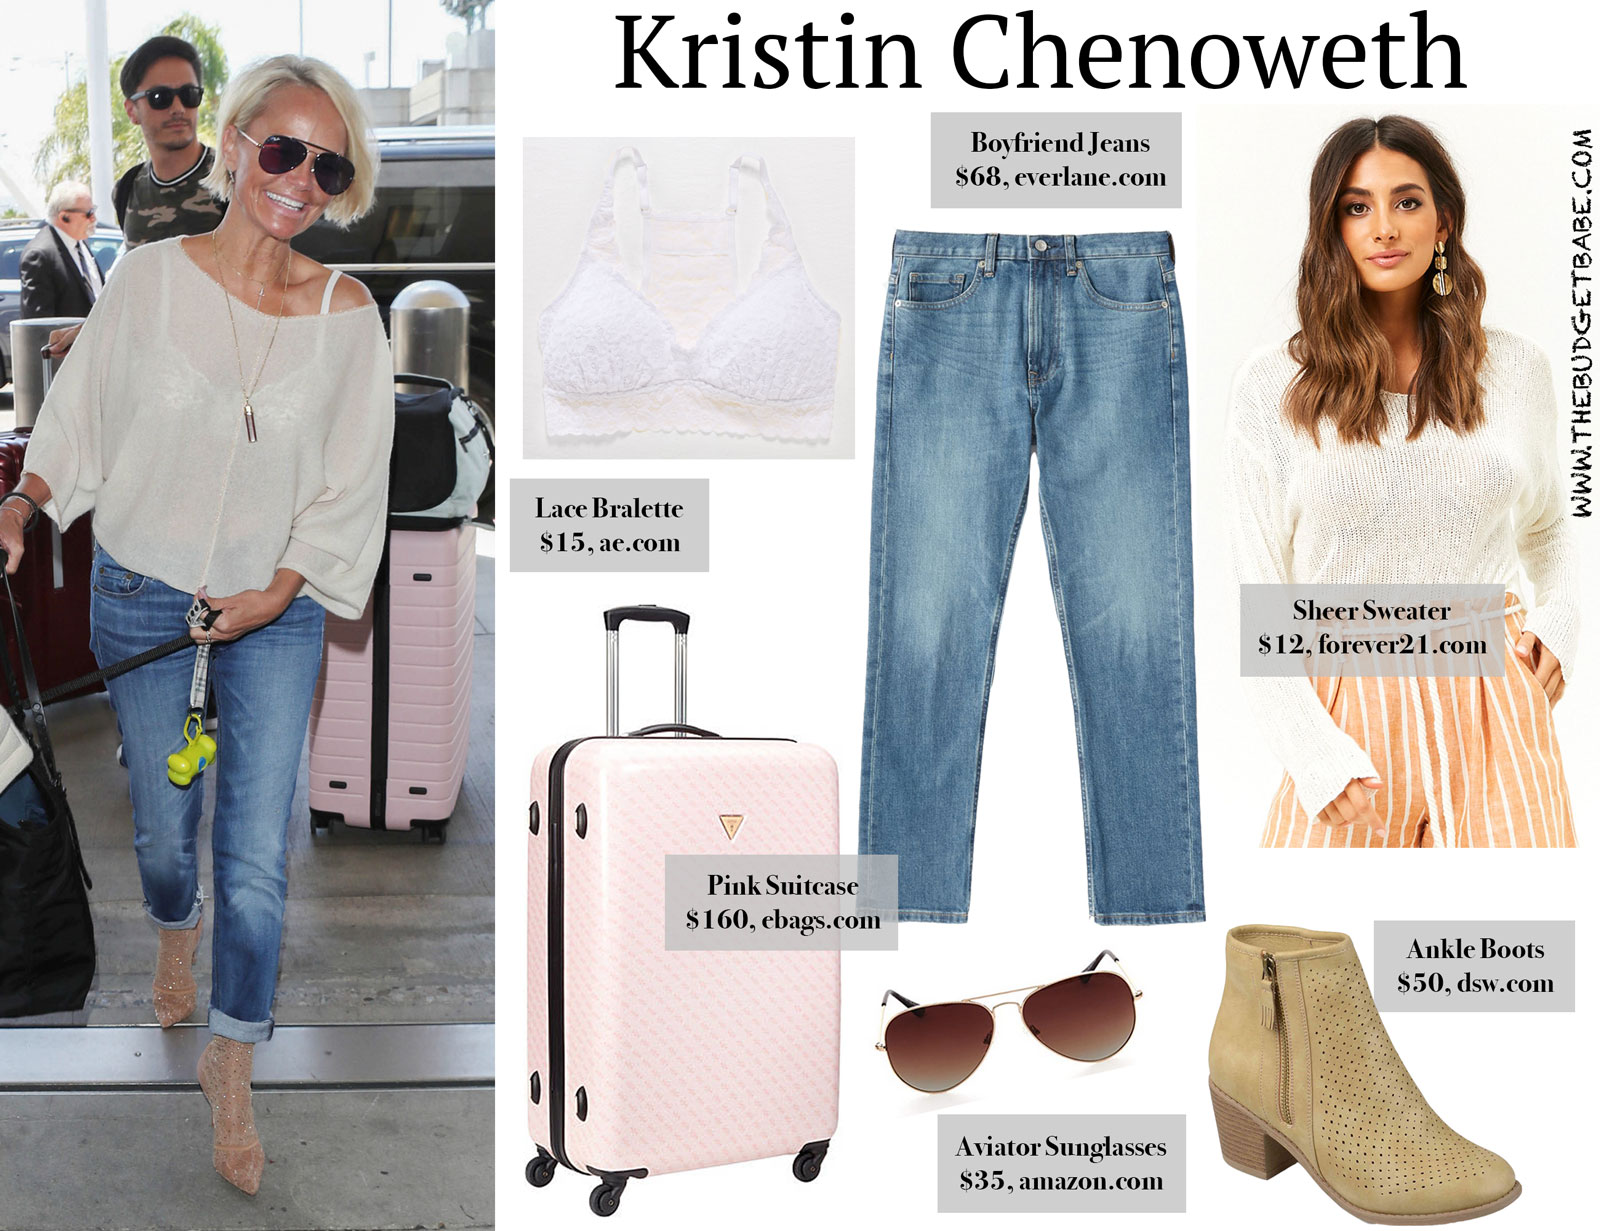 Kristin Chenoweth Travel Outfit and Pink Suitcase for Less